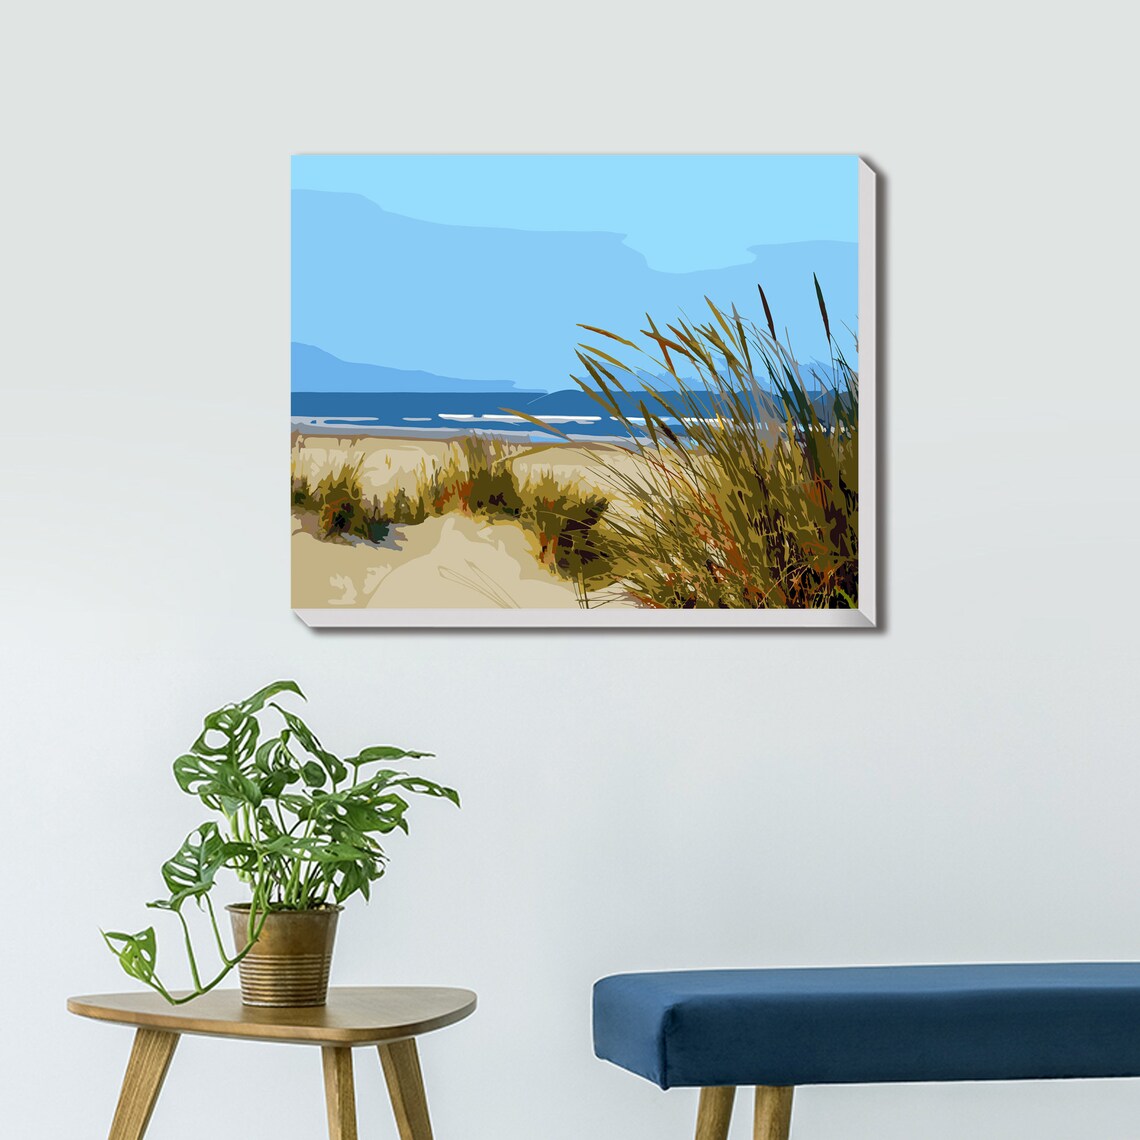 Beach Grass - Paint by Number Kit DIY Oil Painting on Wood Stretched Canvas 16"x20"